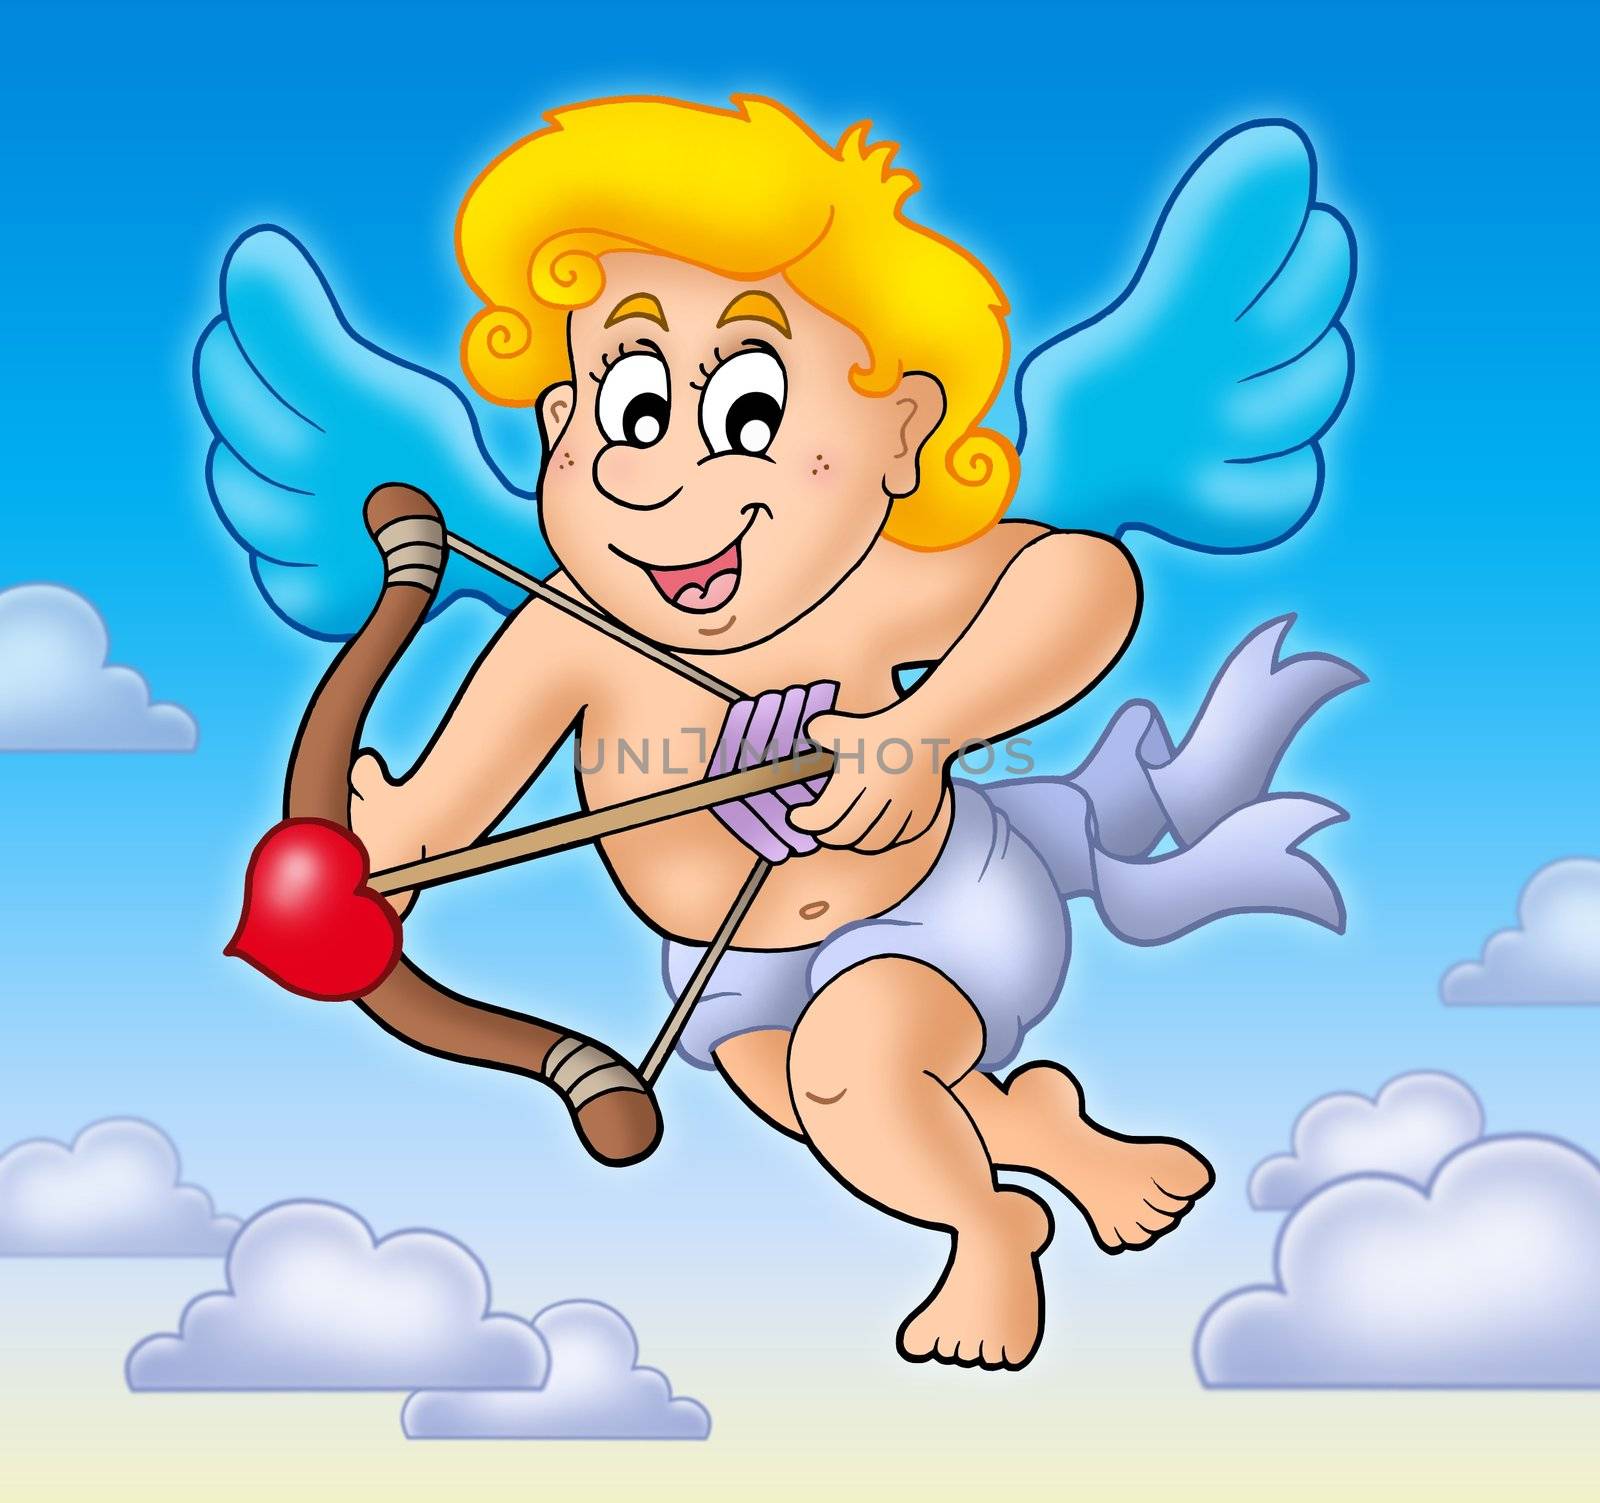 Valentine Cupid with bow on sky - color illustration.